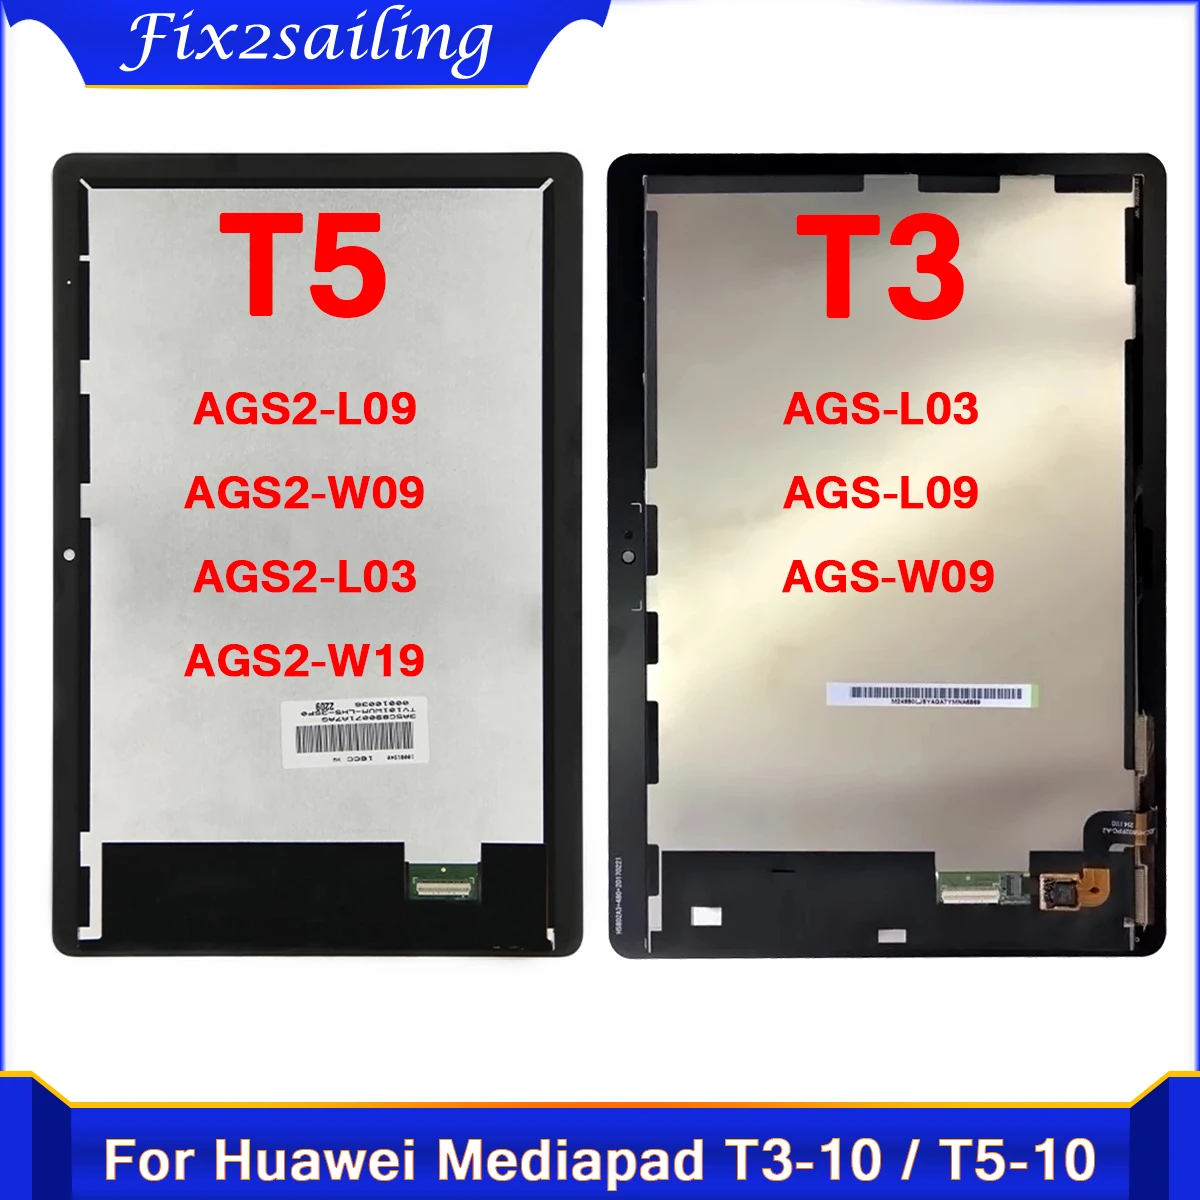 

Test LCD Display For Huawei MediaPad T3 T5 10 AGS-L03 AGS-L09 AGS-W09 AGS2-L09 AGS2-W09 AGS2-L03 Touch Screen Digitizer Assembly